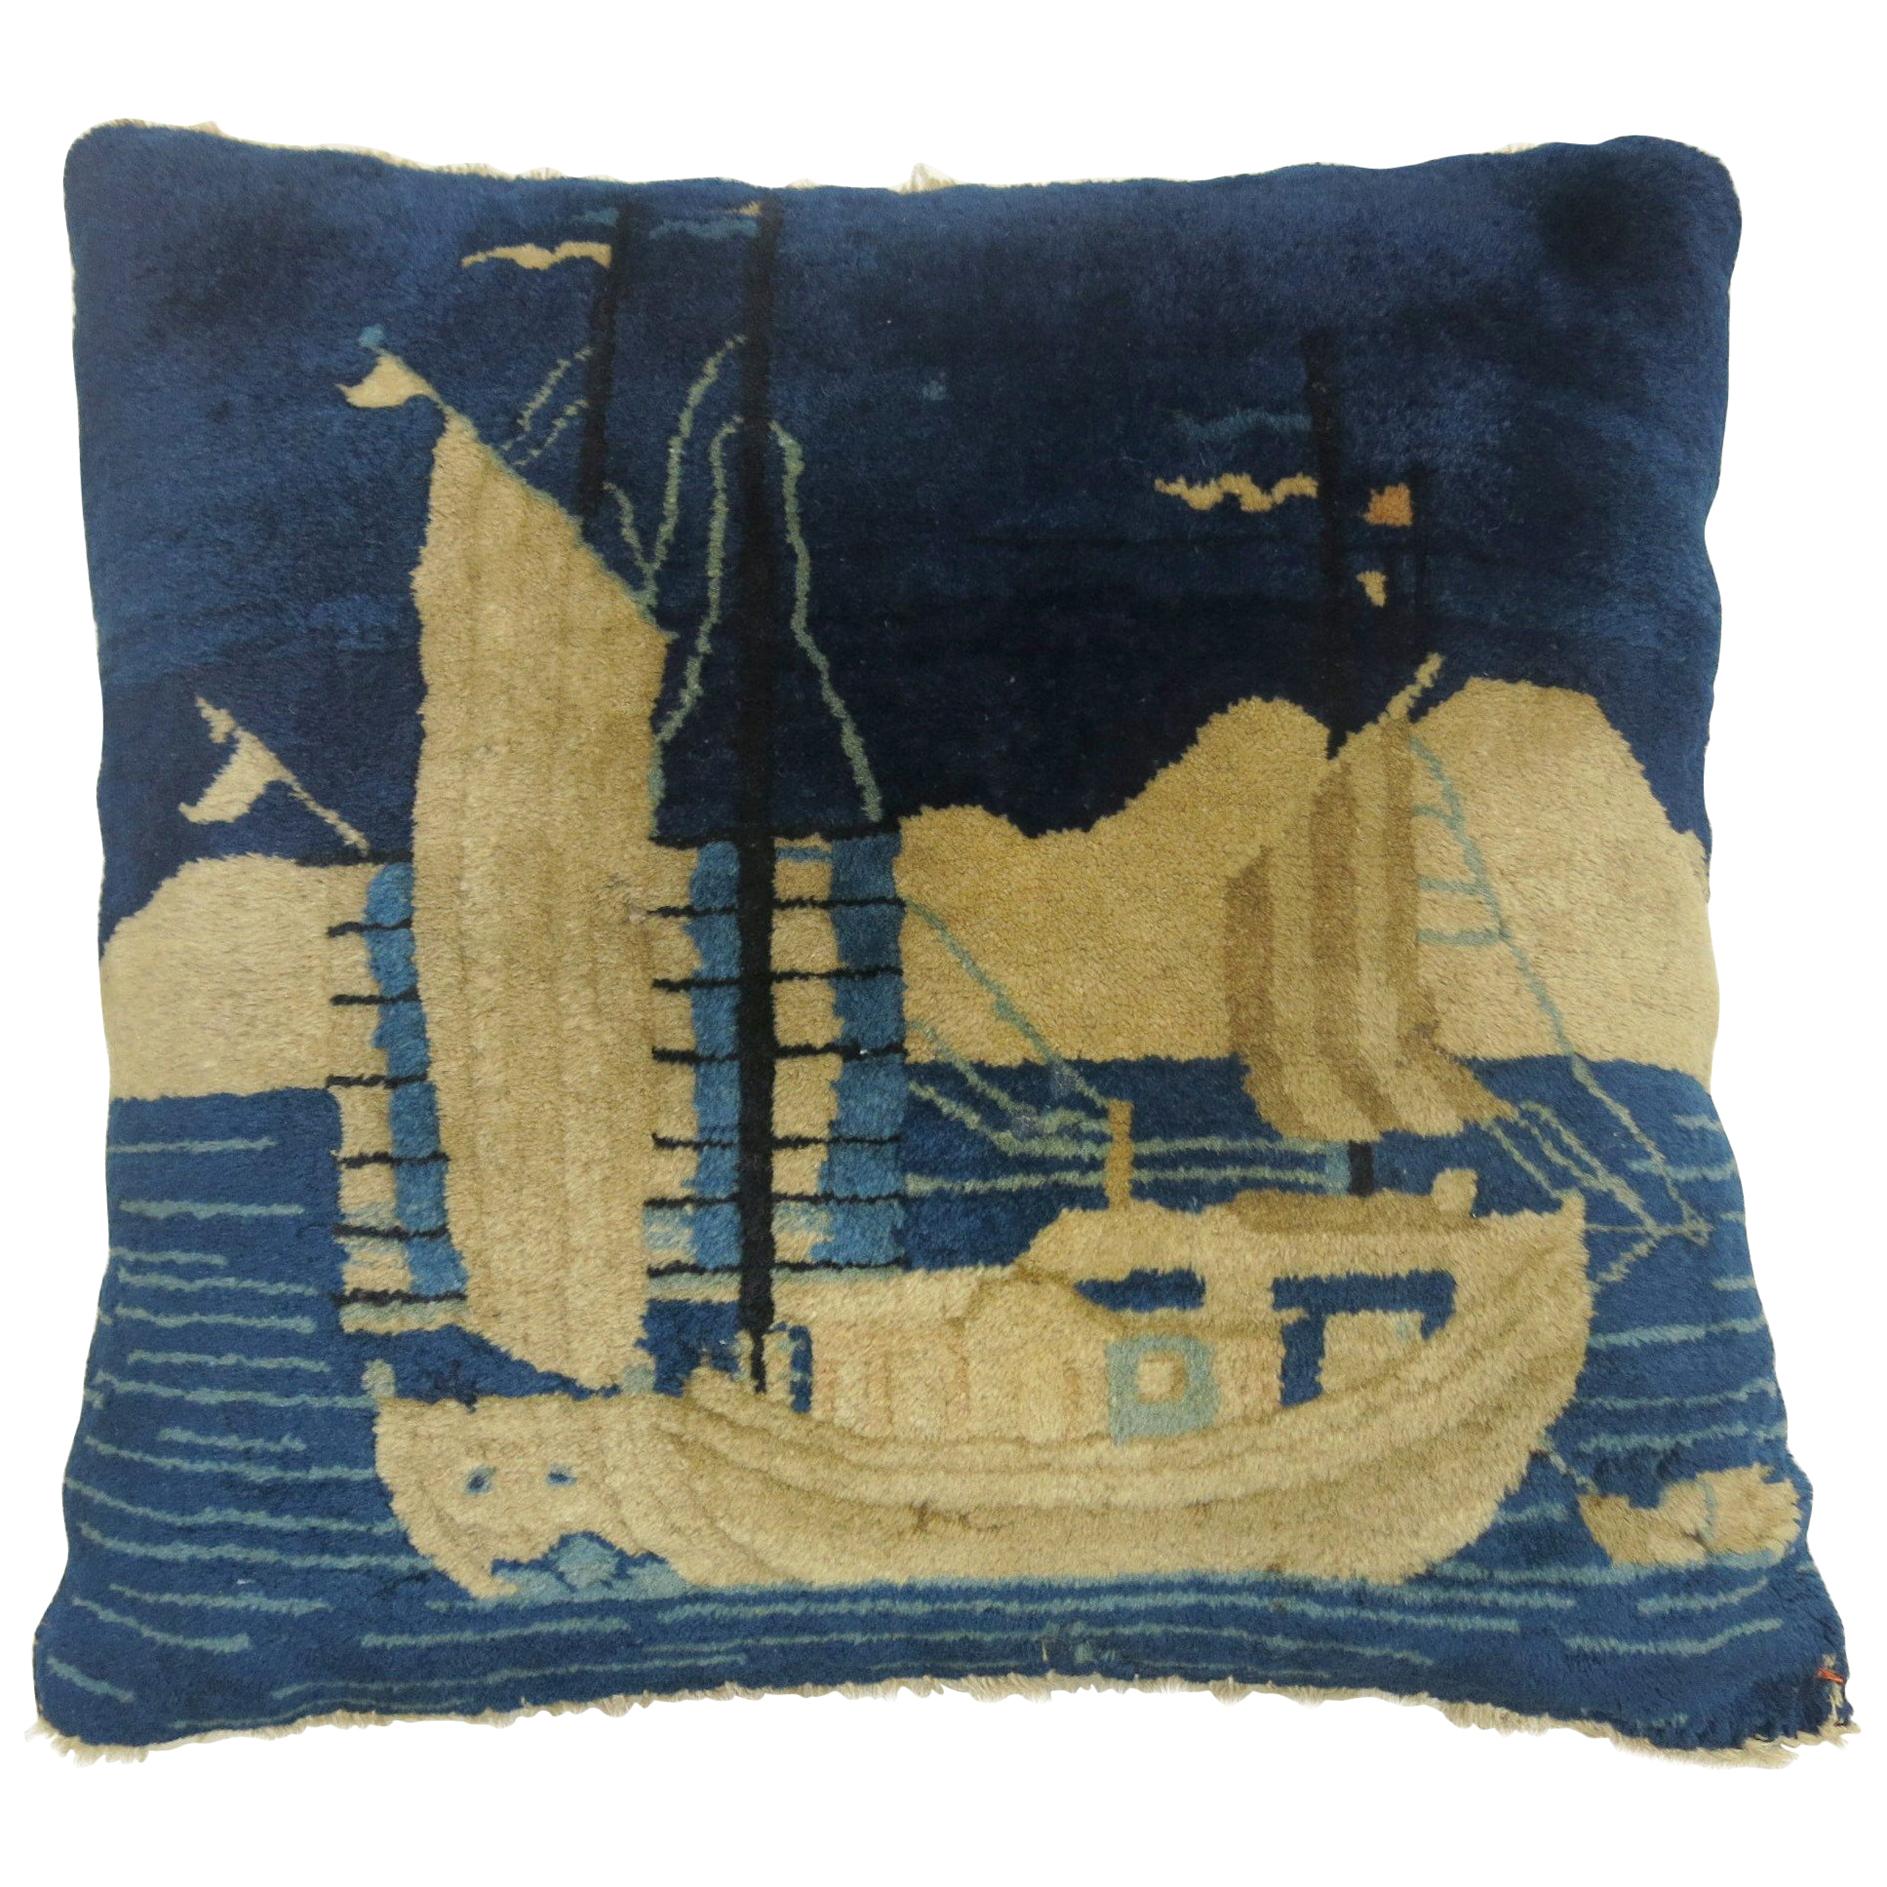 Large Square Blue Chinese Pictorial Sailboat Rug Pillow